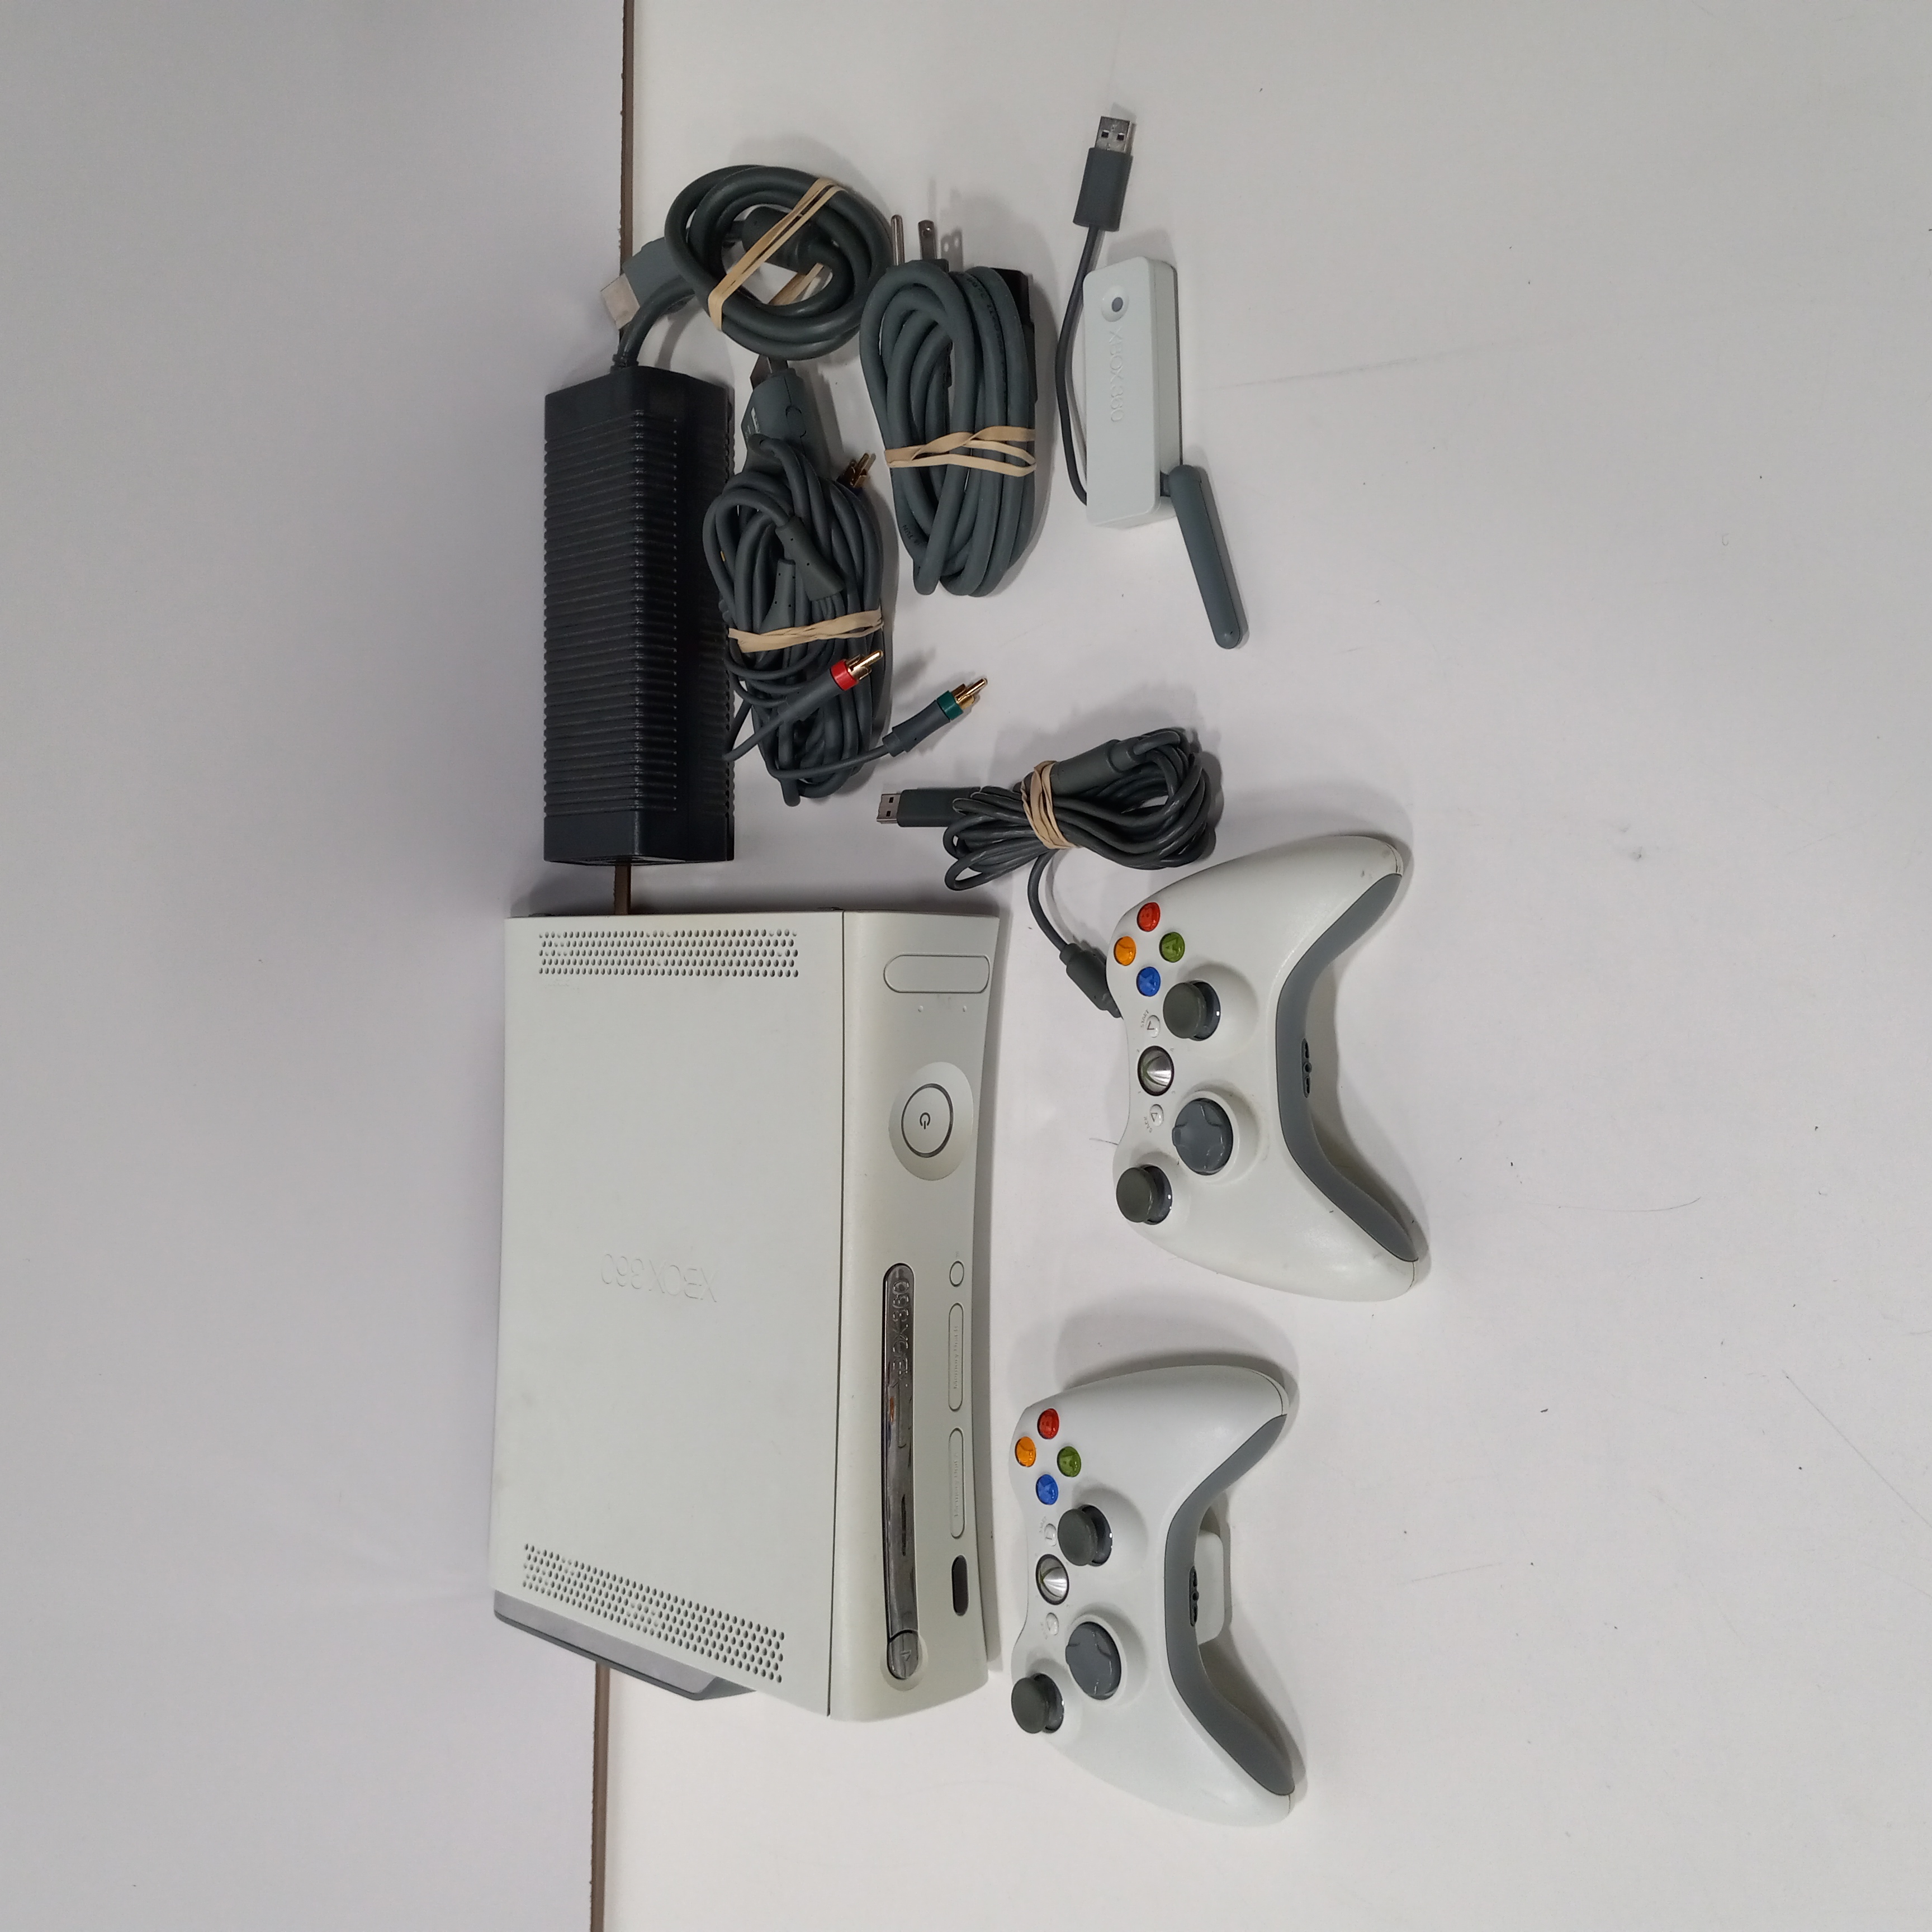 Hedendaags Katholiek een experiment doen Buy the Bundle of Microsoft Xbox 360 Console With 2 Controllers And  Wireless Network | GoodwillFinds